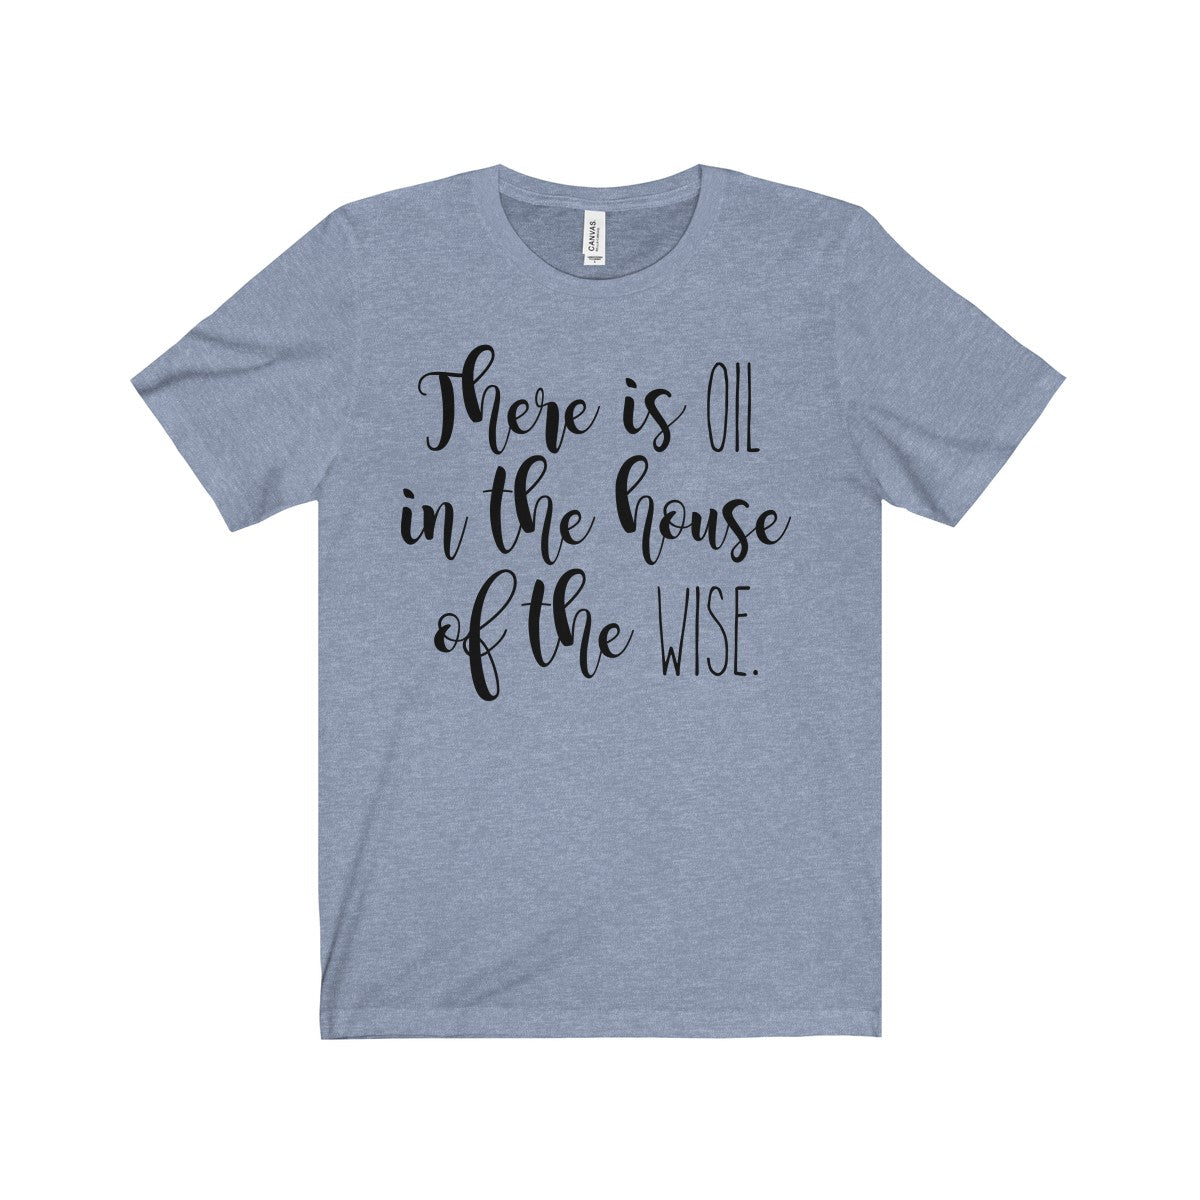 There Is Oil In The House of The Wise Shirt | Farmhouse Vinyl Co.